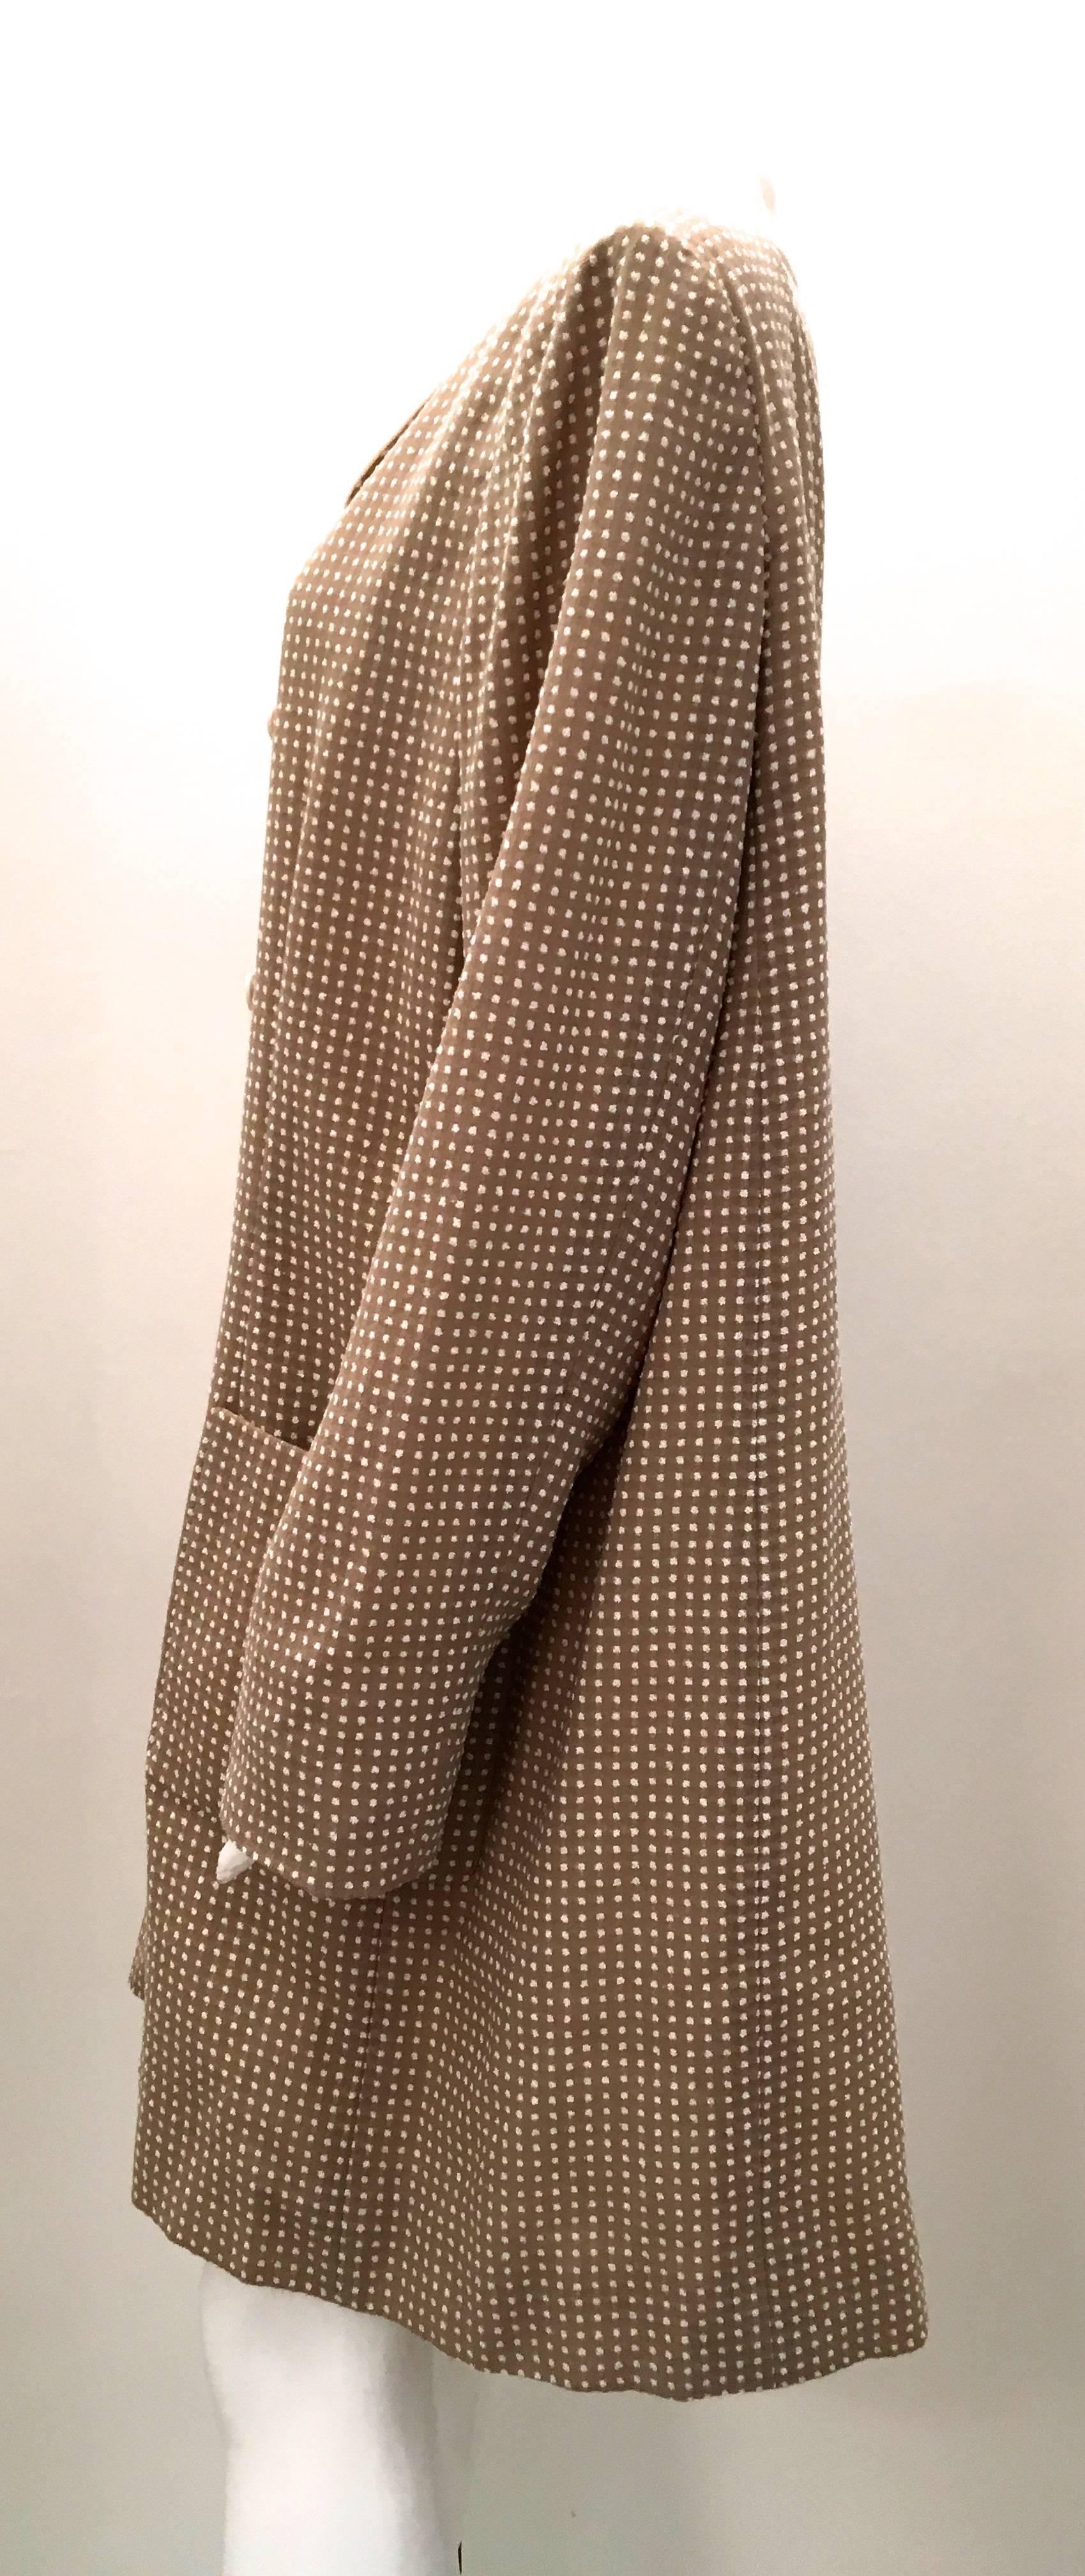 Bill Blass Coat - Beige and White - 1970's For Sale 1